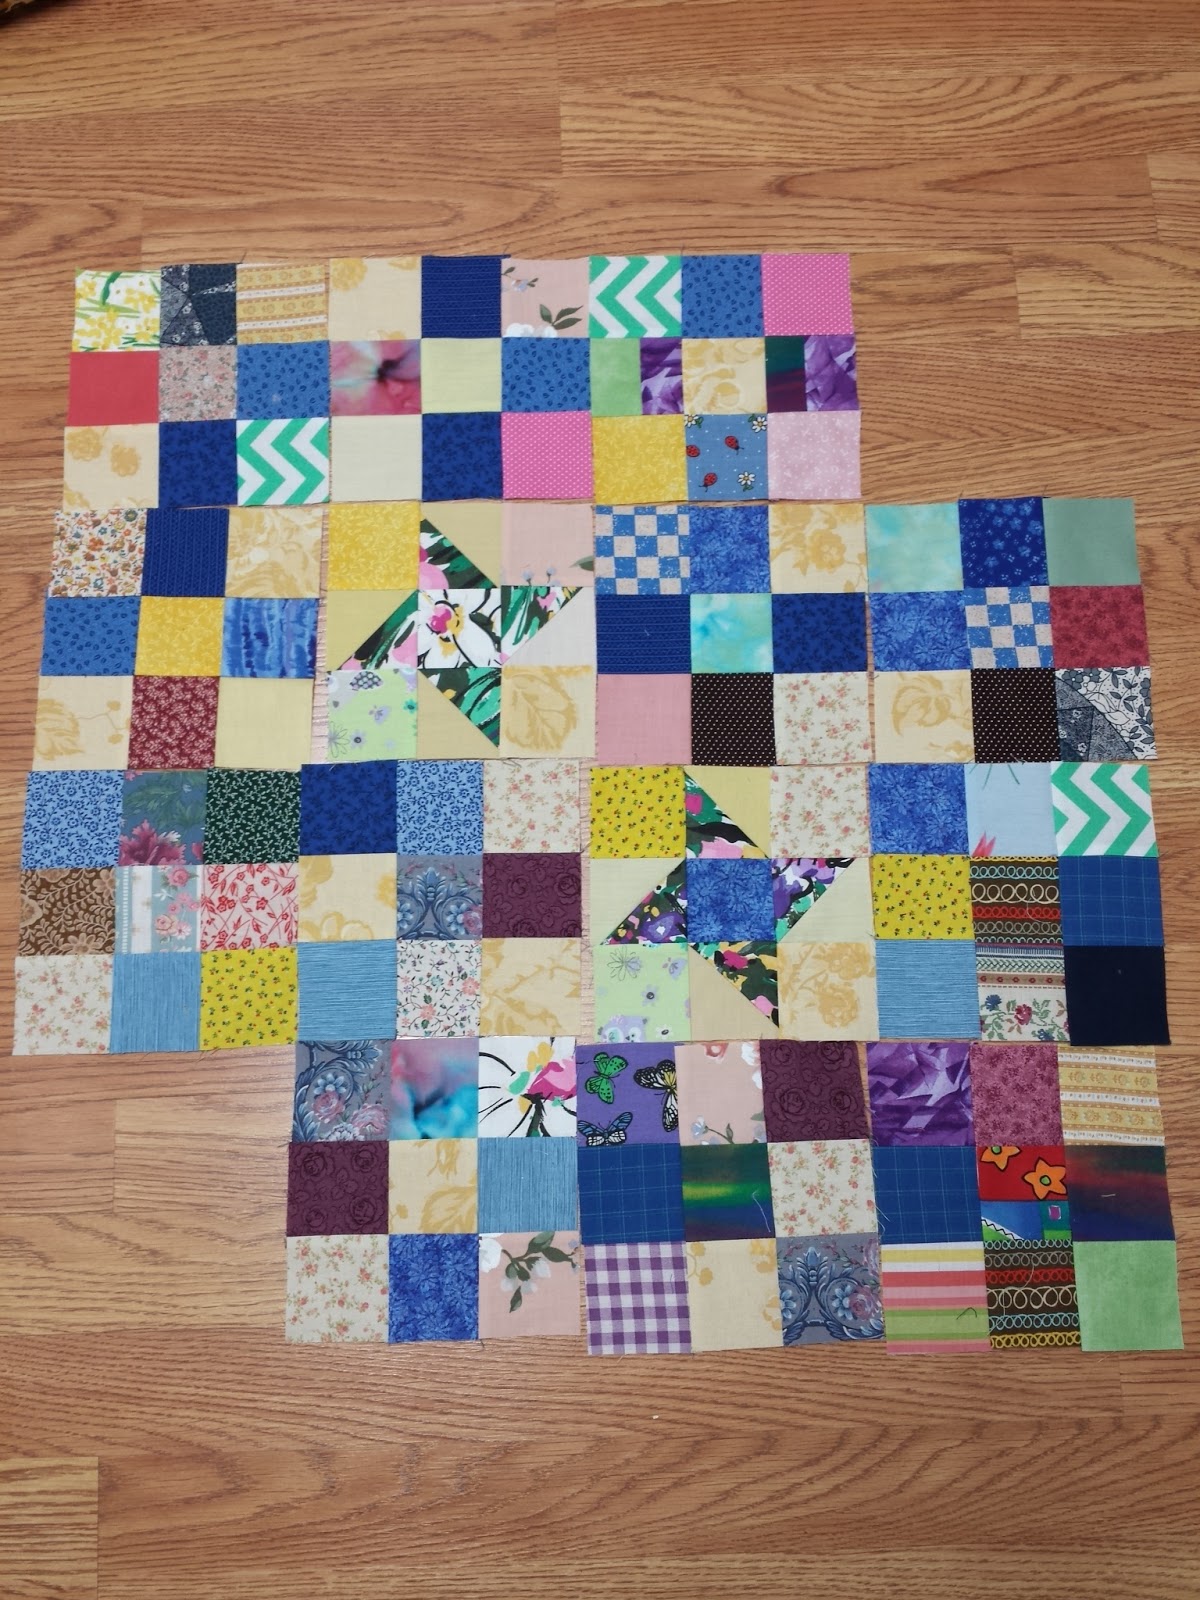 Becca's Crazy Projects: Charity Quilting: Dancing Nine-Patch